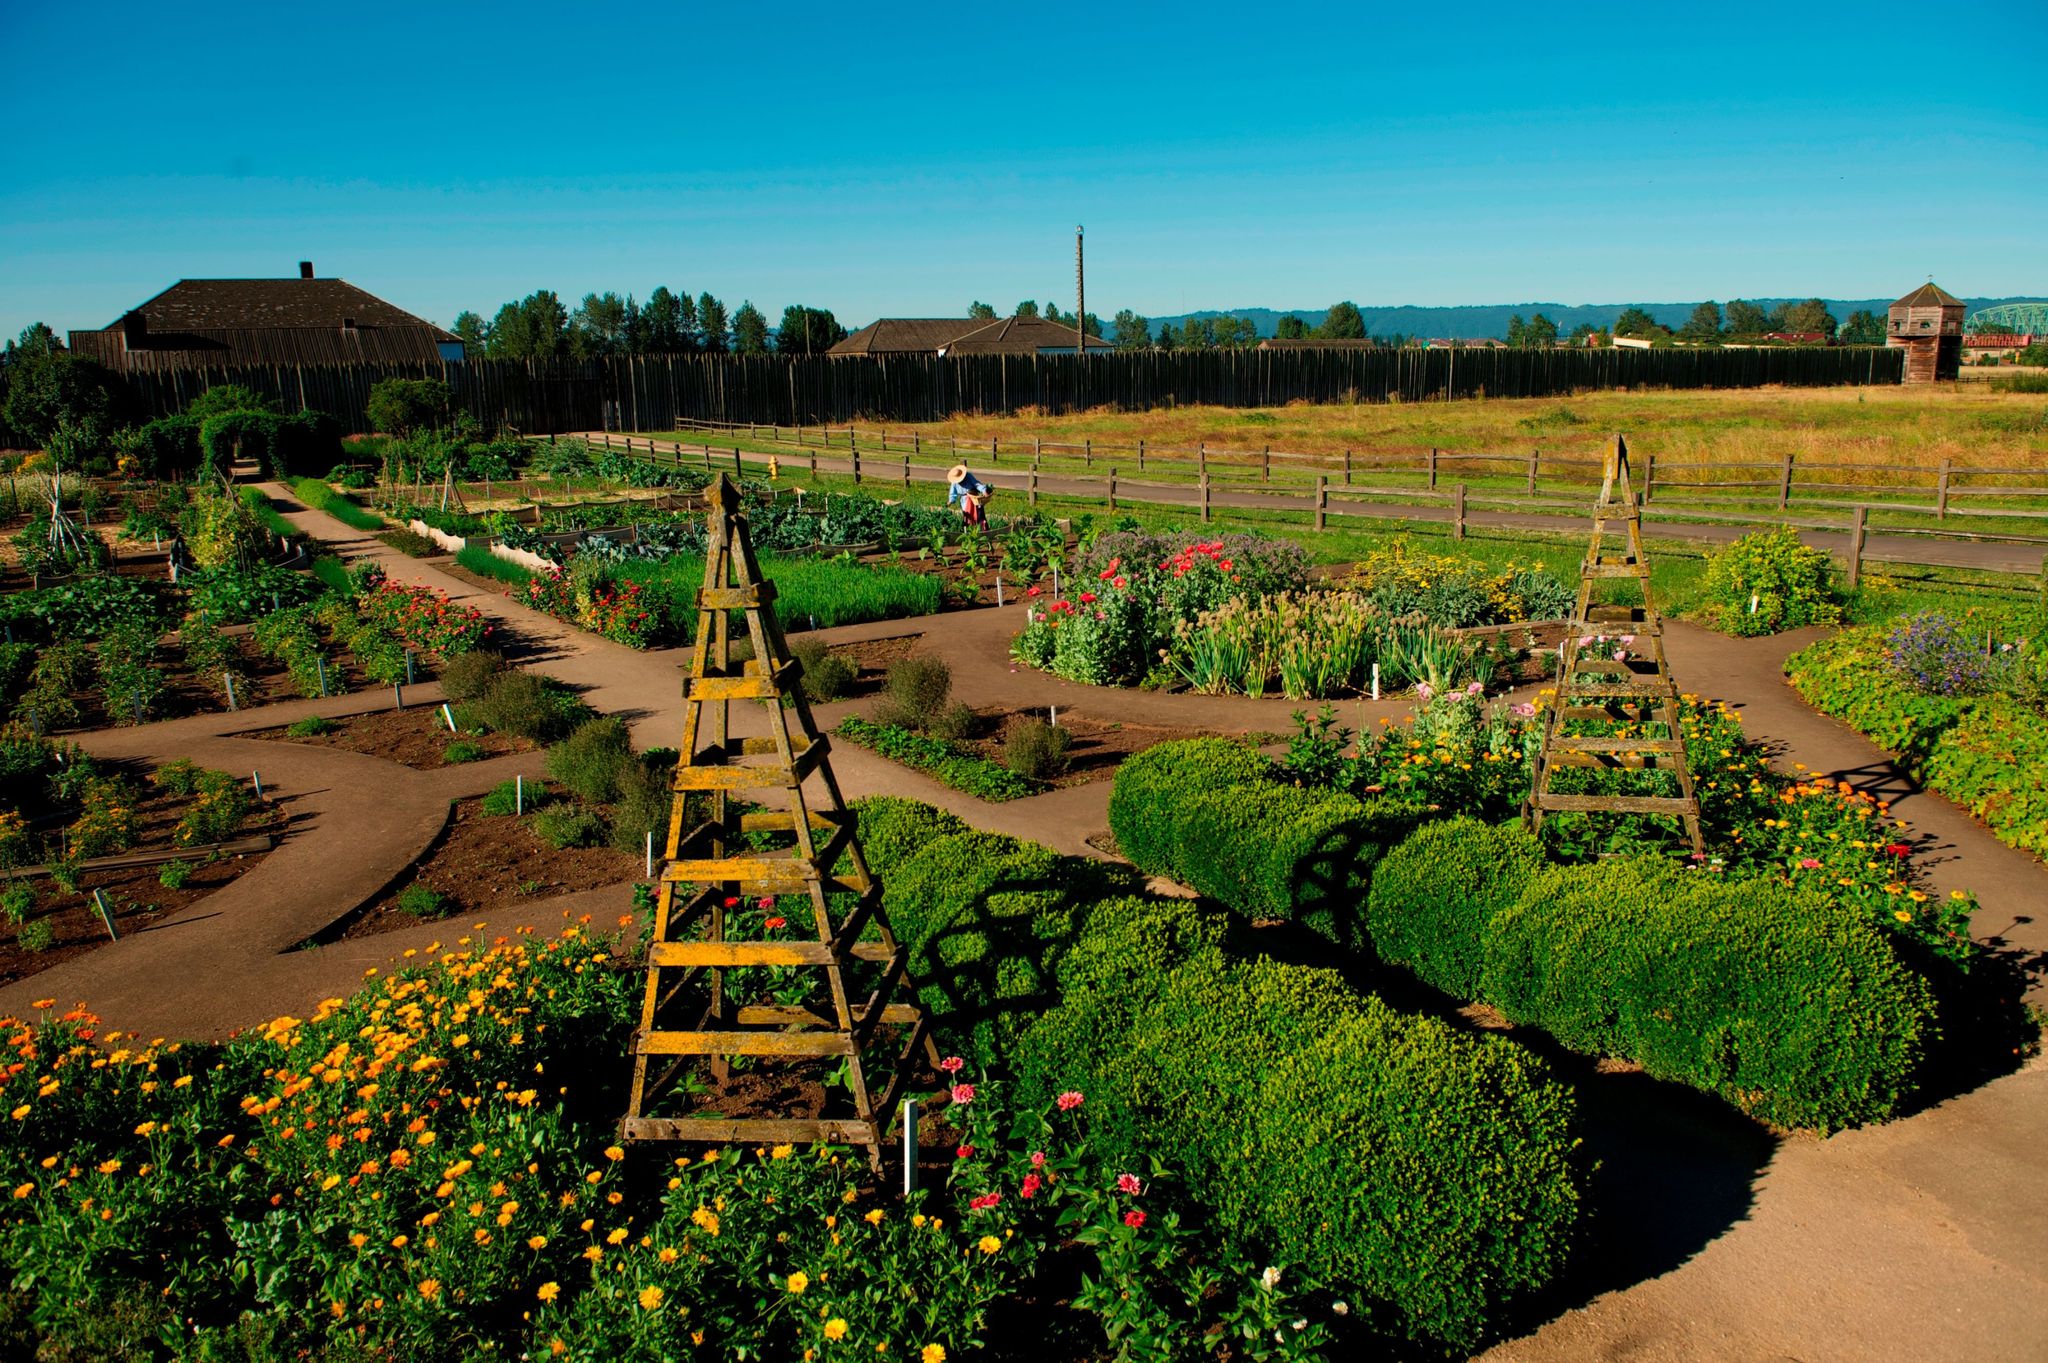 The garden at the reconstructed Fort Vancouver showcases the many plants that were grown at the historic Fort Vancouver.